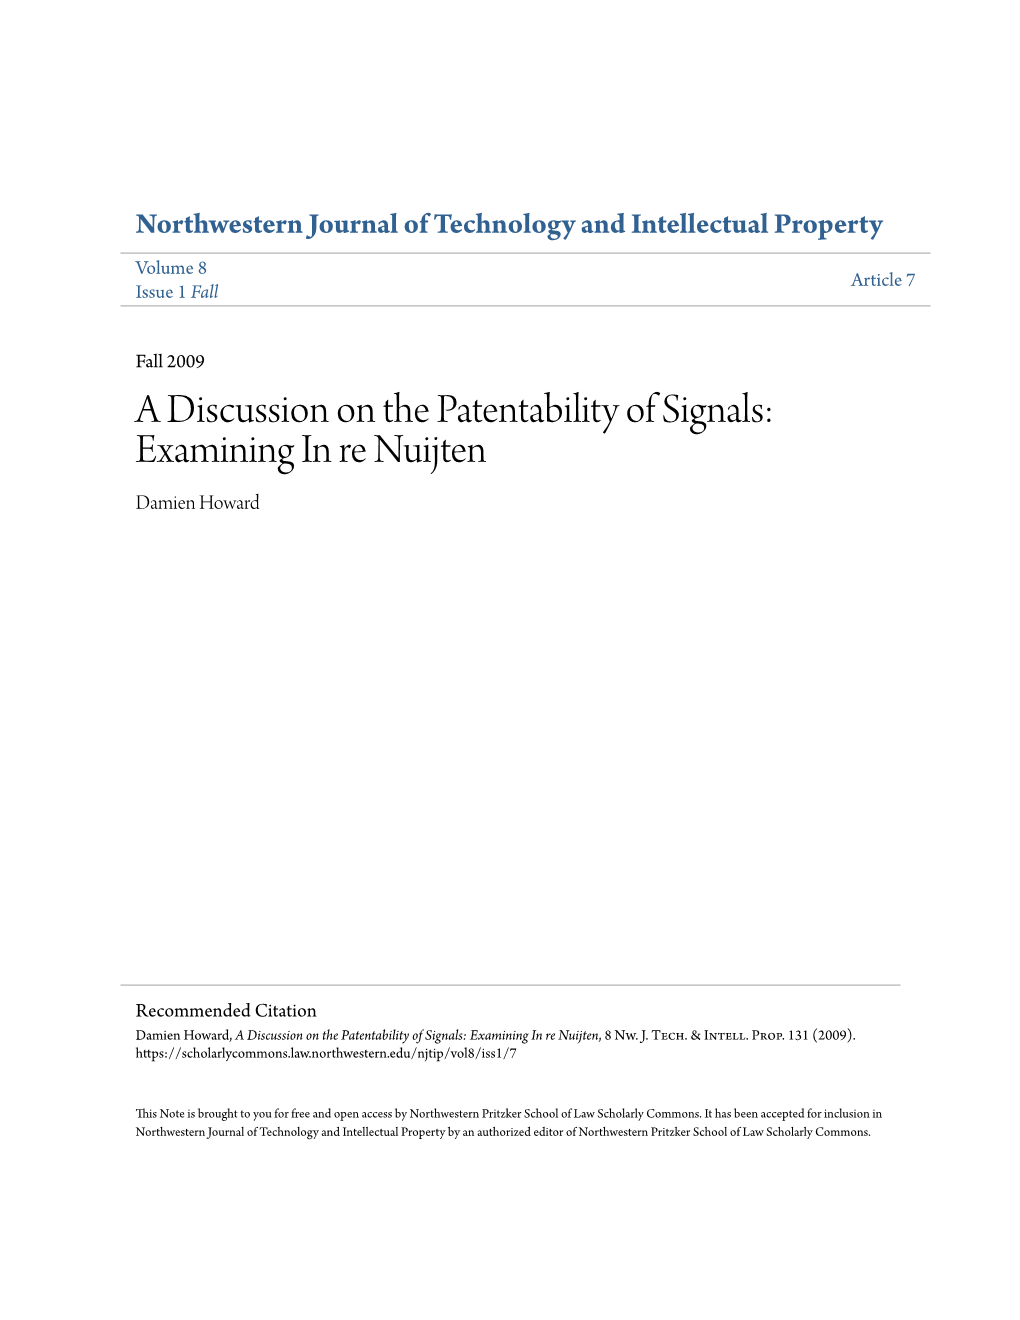 A Discussion on the Patentability of Signals: Examining in Re Nuijten Damien Howard